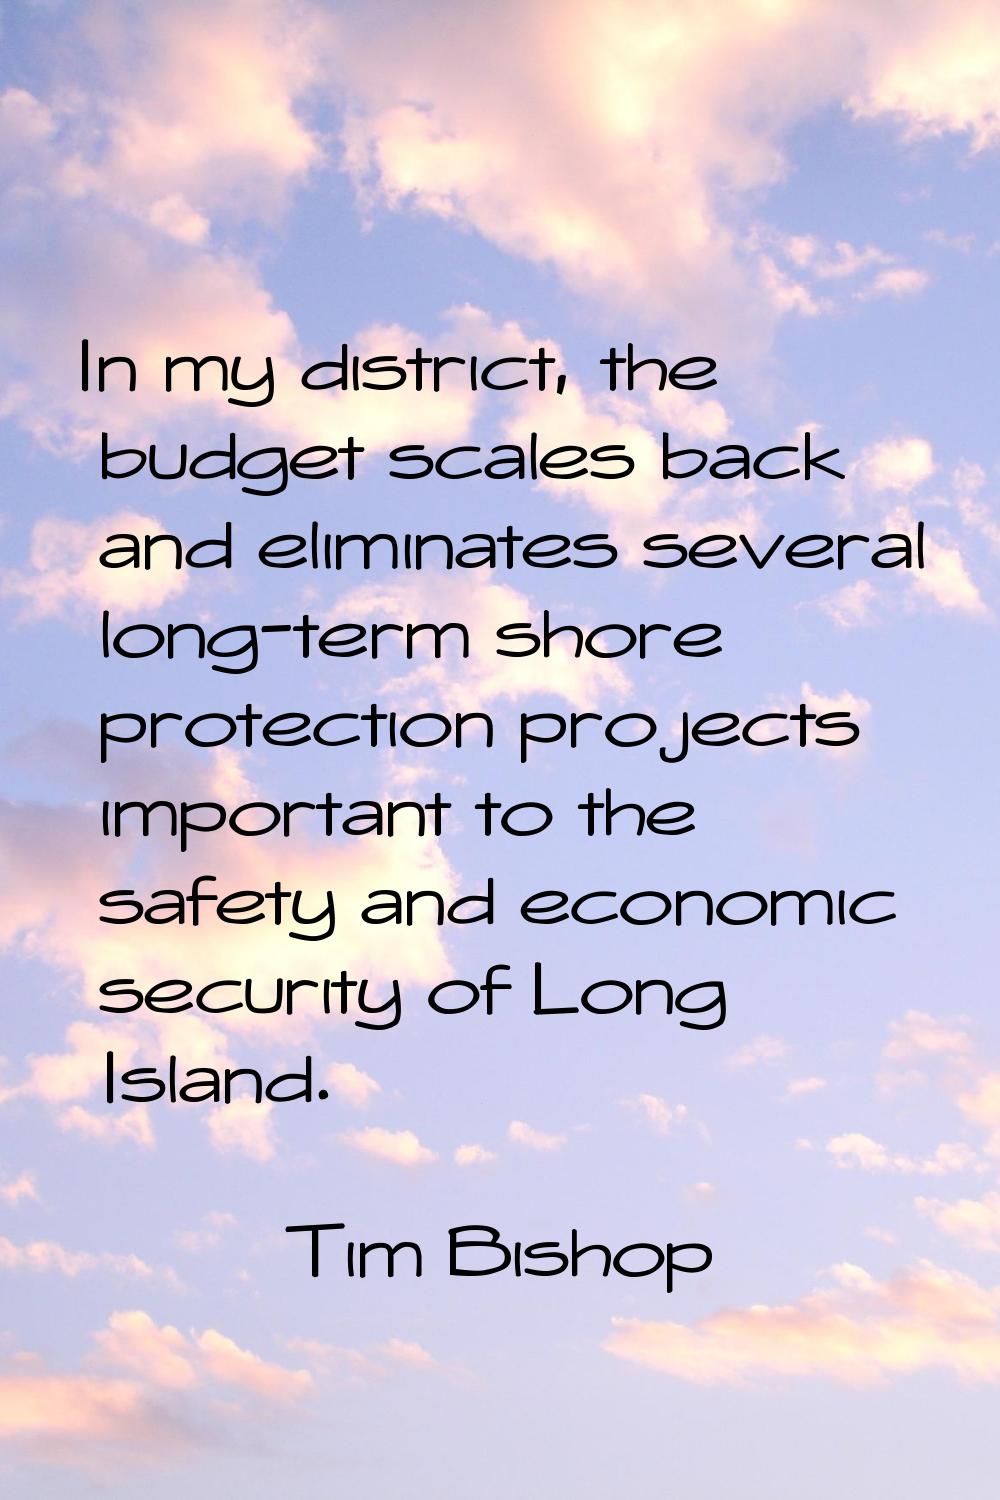 In my district, the budget scales back and eliminates several long-term shore protection projects i